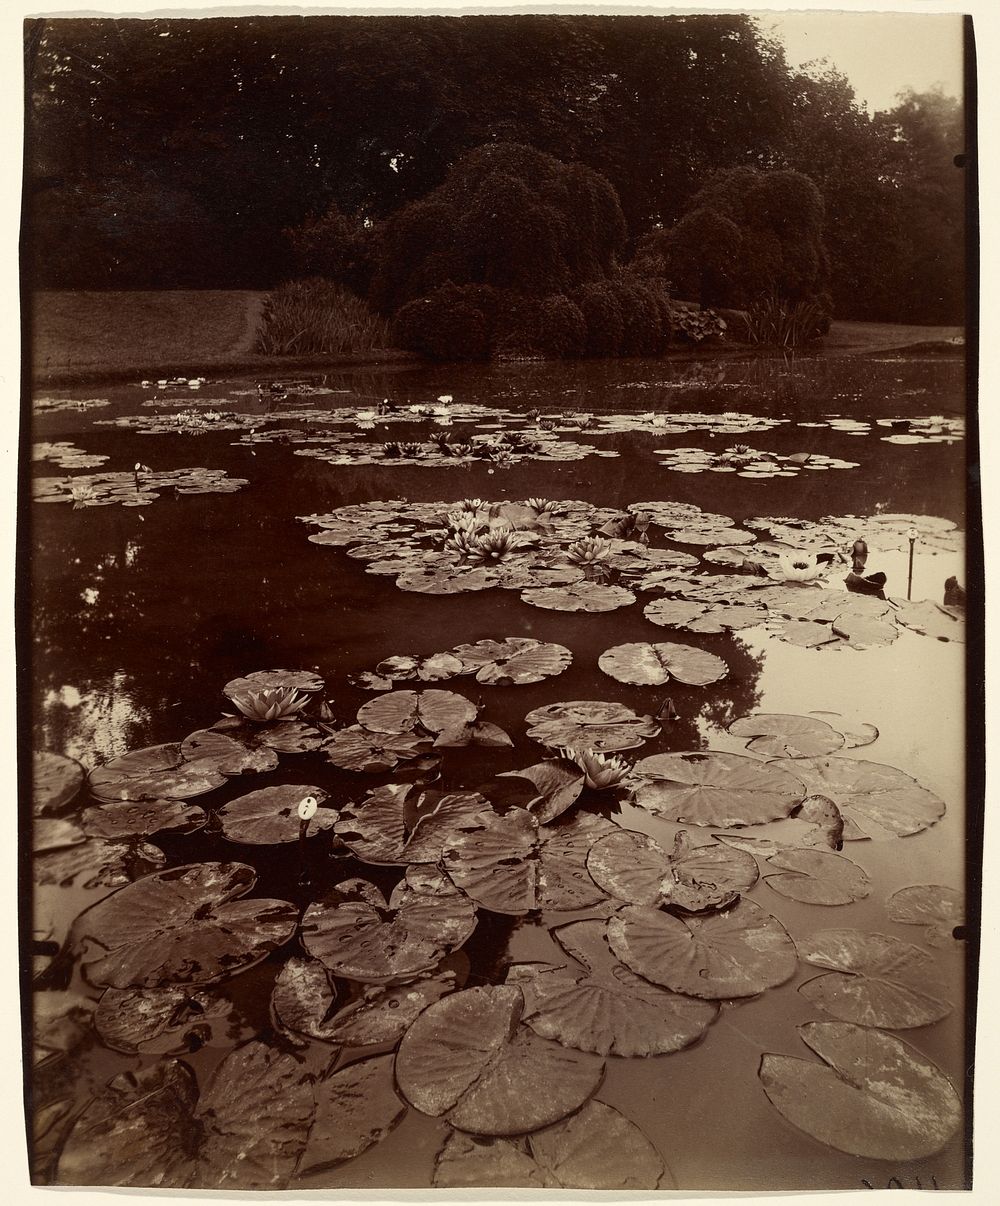 Water Lilies by Eugène Atget